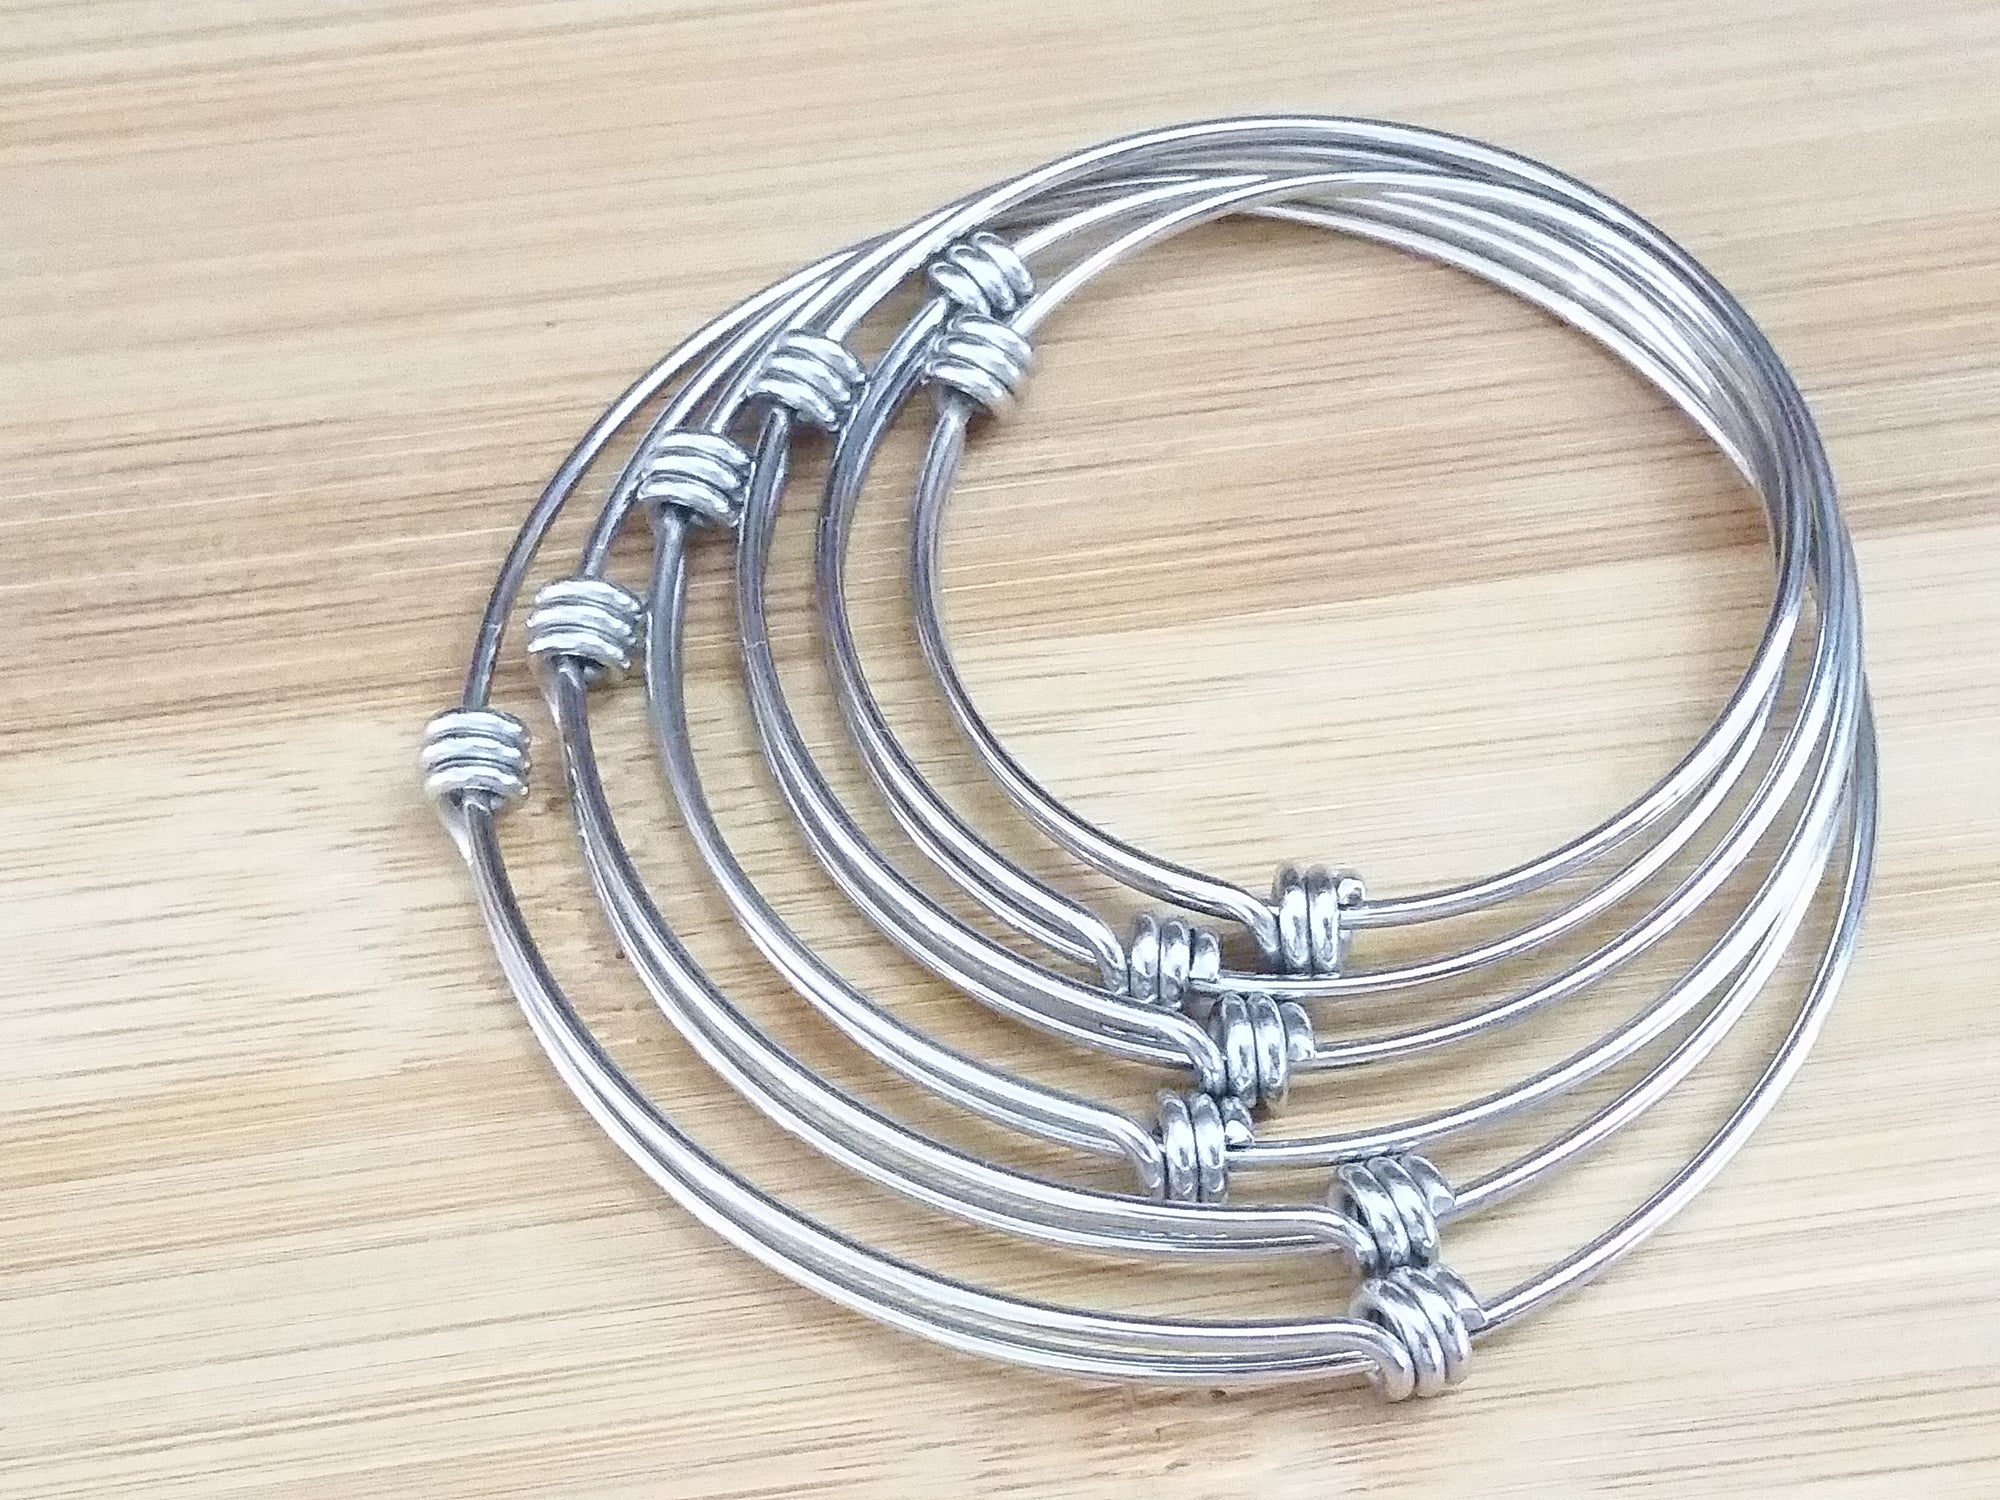 Hand Made Stainless Steel Wide Bangle - Etsy | Stainless steel bangles,  Bangles, Silver bangle bracelets